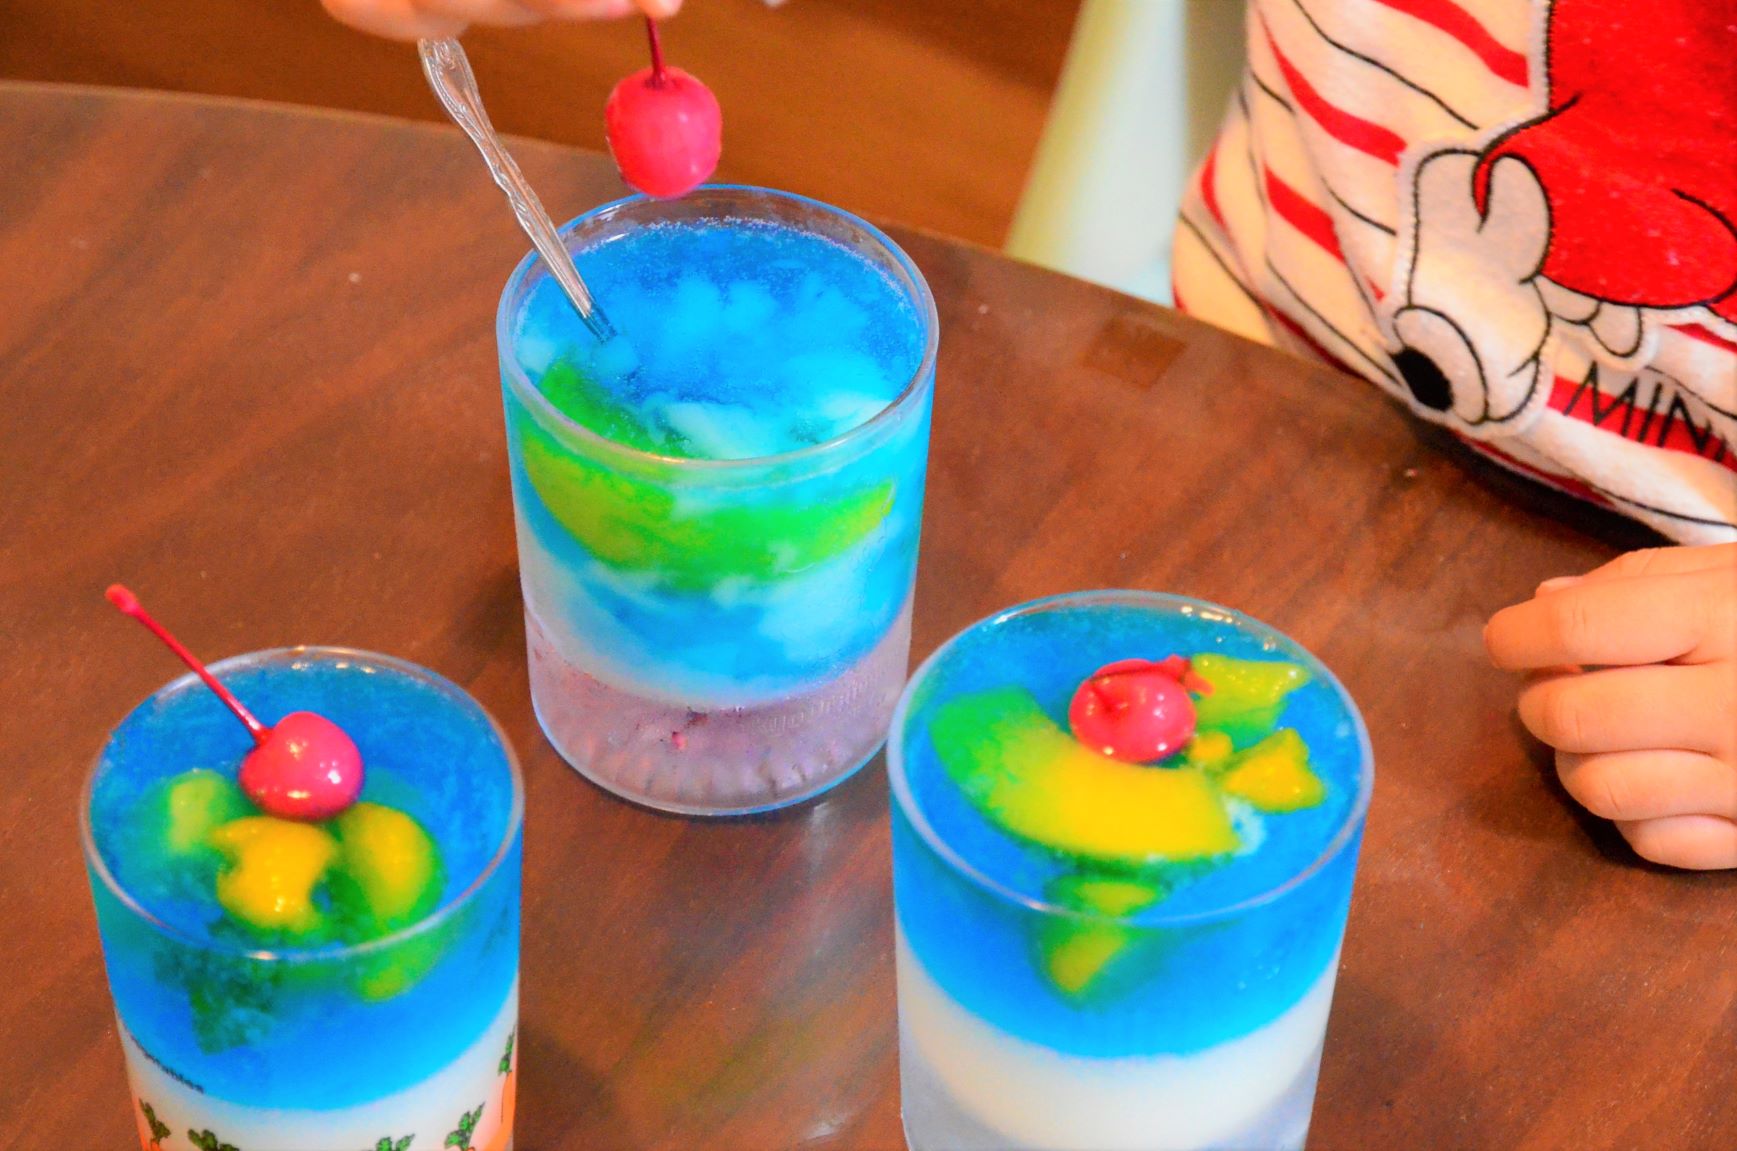 Two-layer Tanabata jelly